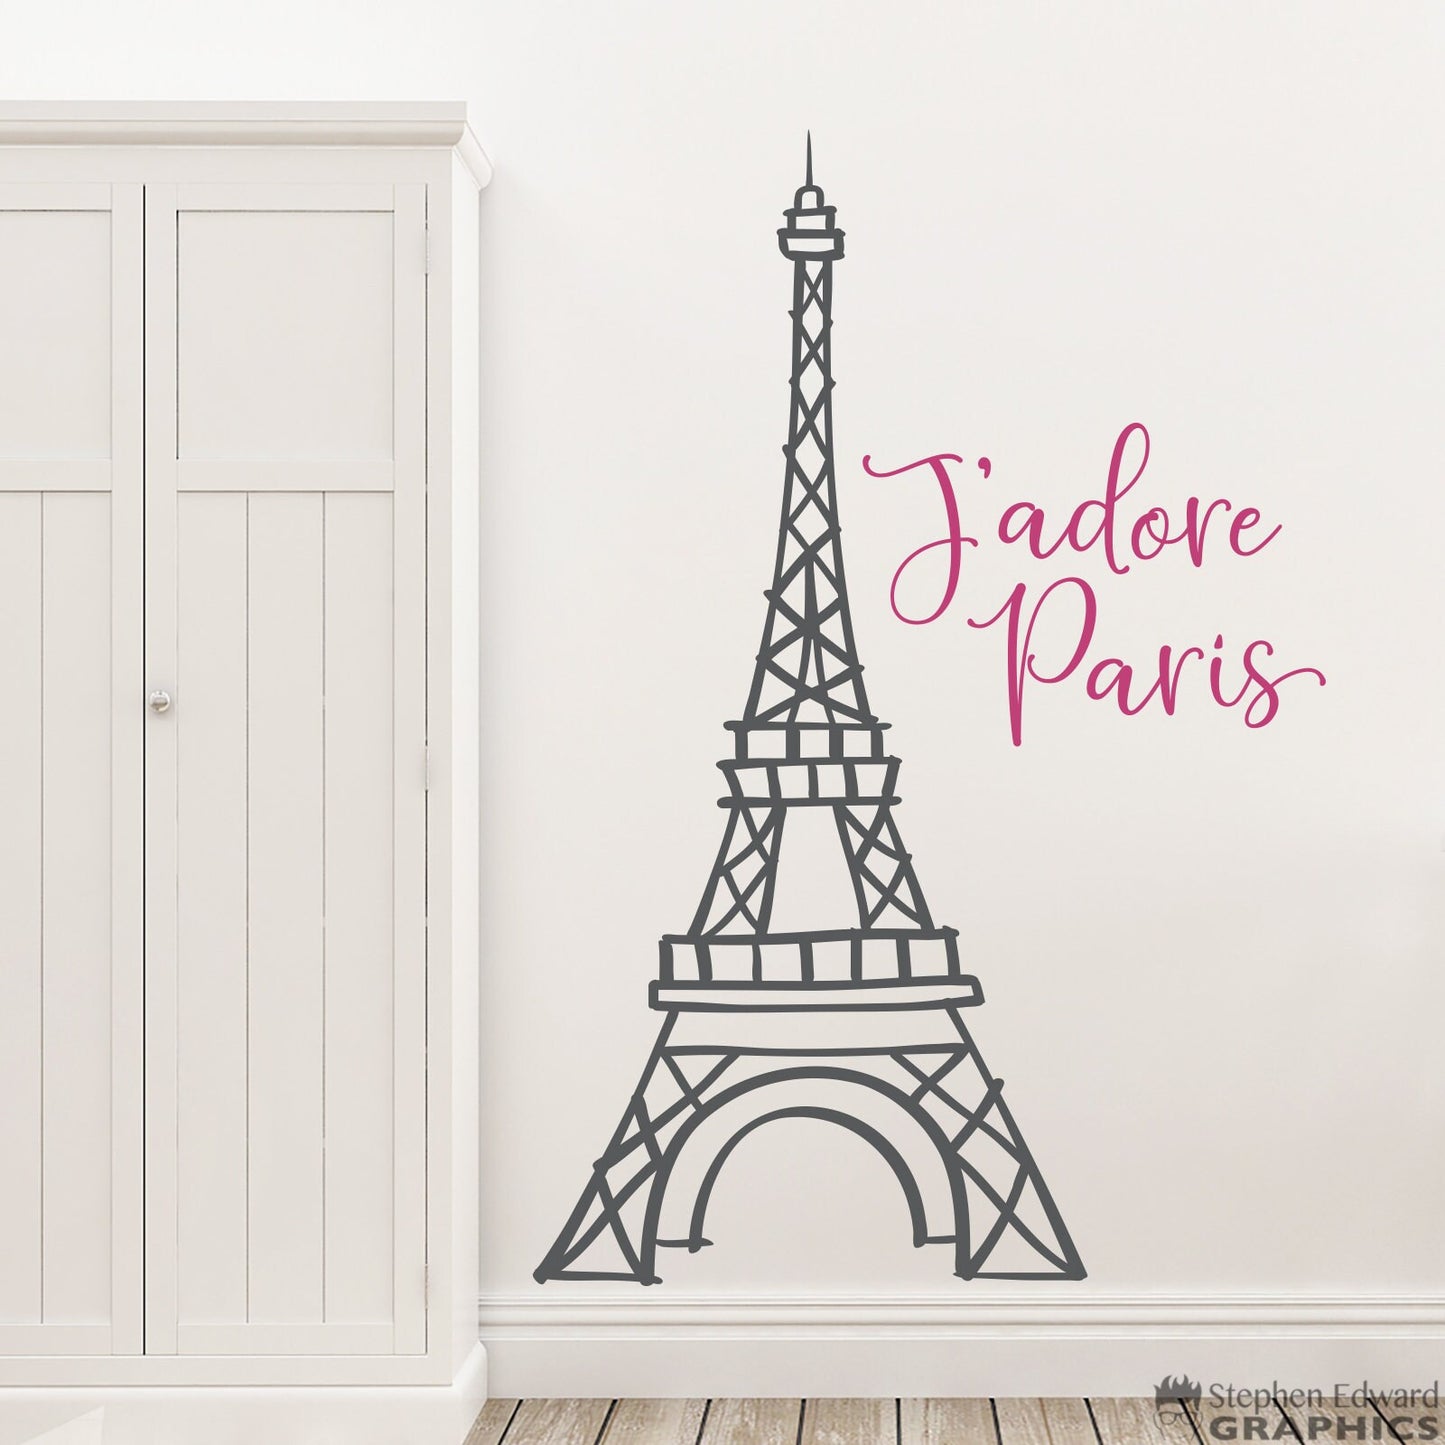 J'adore Paris Eiffel Tower Decal Set | French Bedroom Decor | Eiffel Tower Wall Sticker with I love Paris quote